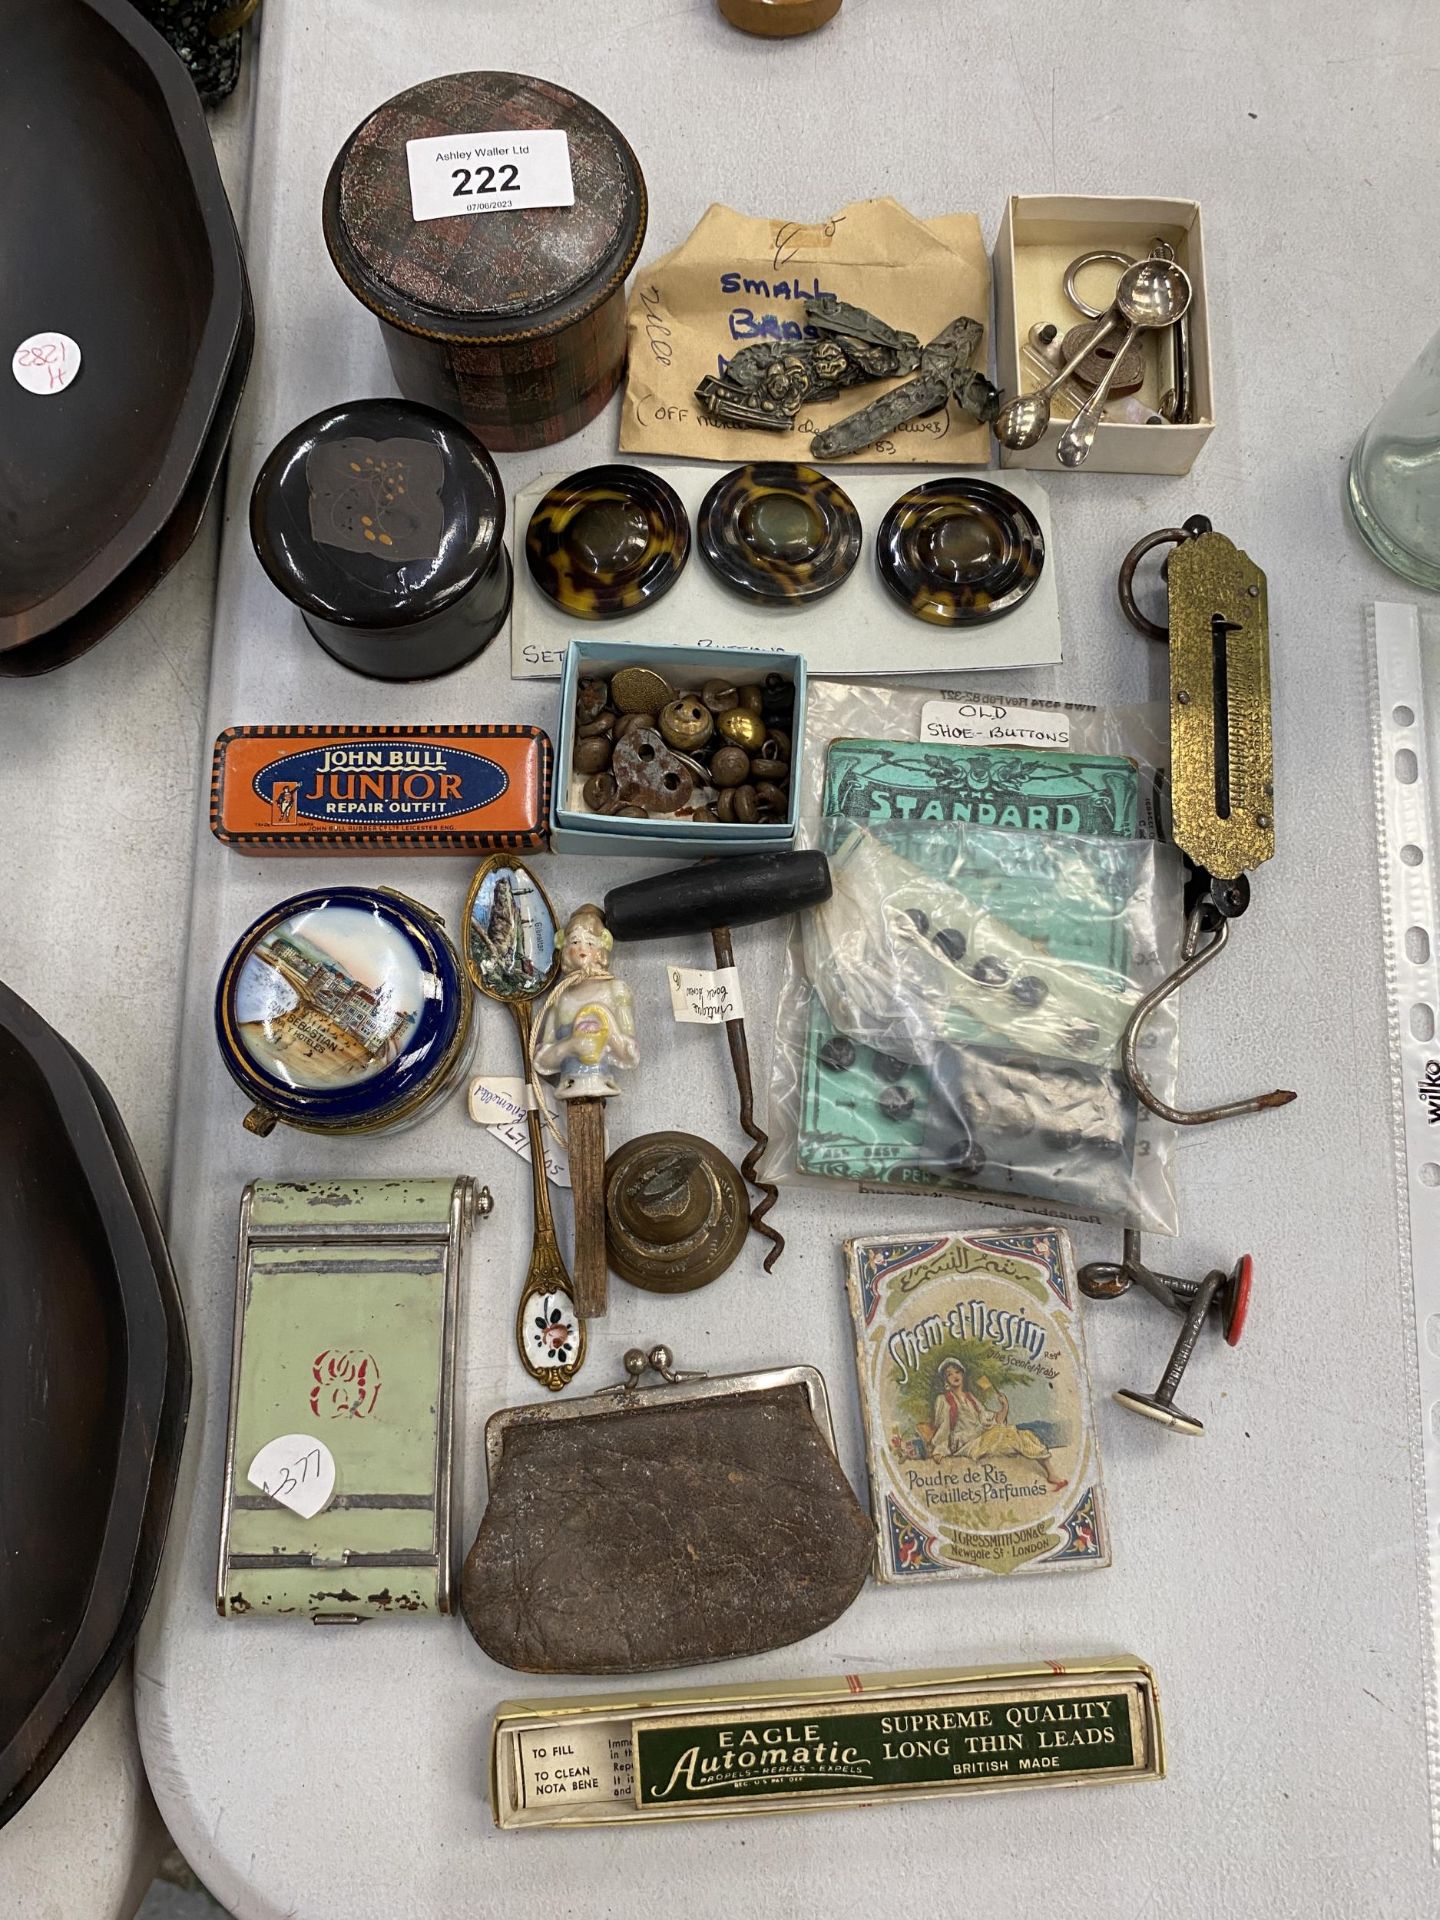 A MIXED VINTAGE LOT TO INCLUDE SMALL BRASS MOTIFS, TRINKET BOXES, VINTAGE BUTTONS, CIGARETTE CASE,